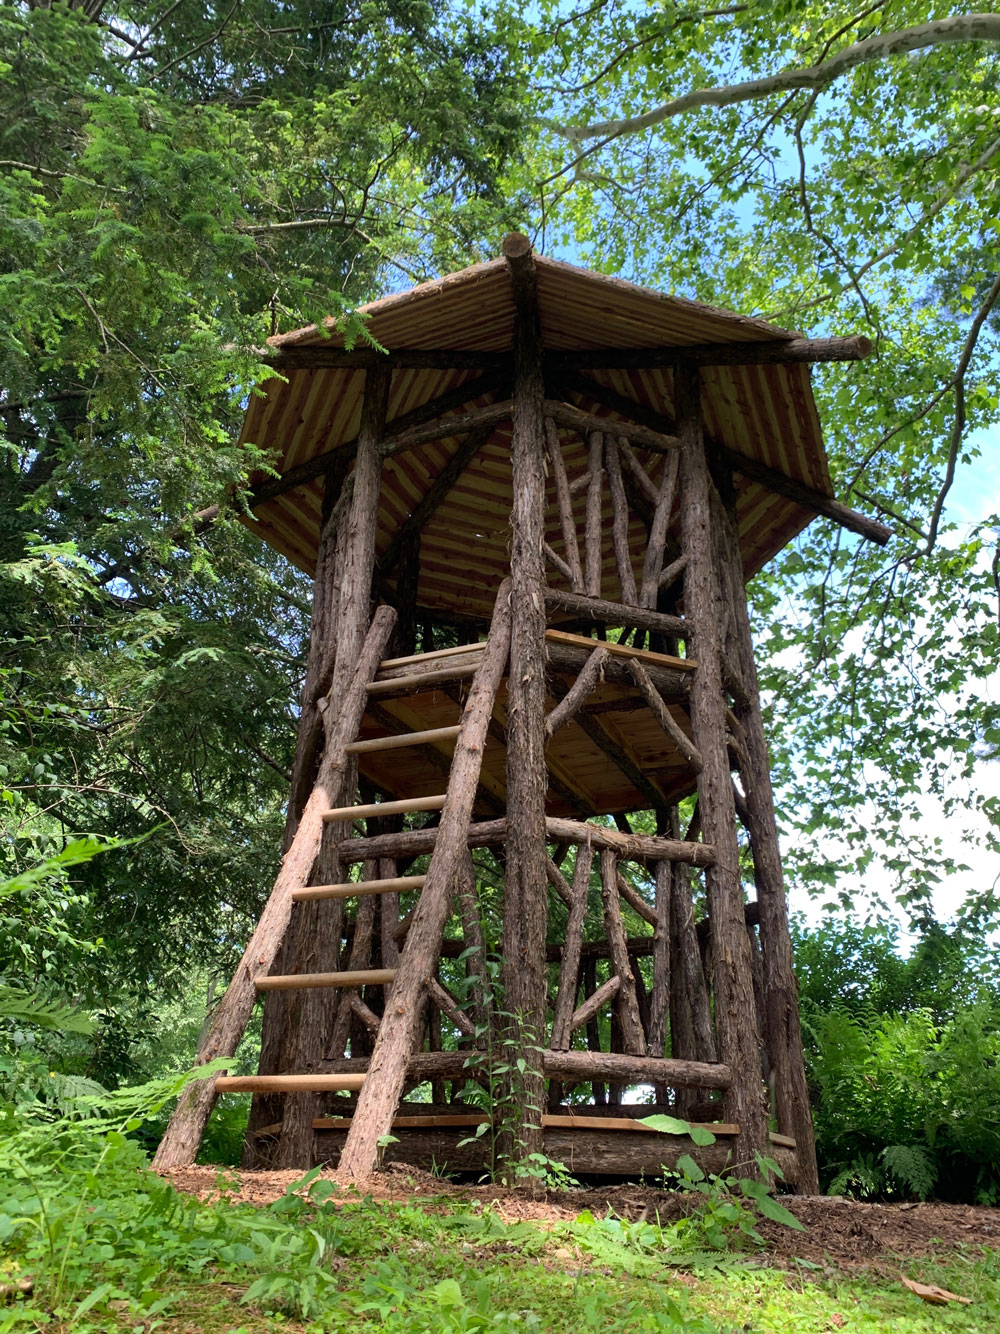 Outdoor rustic play tower built using bark-on trees and branches titled the Bedford Tower